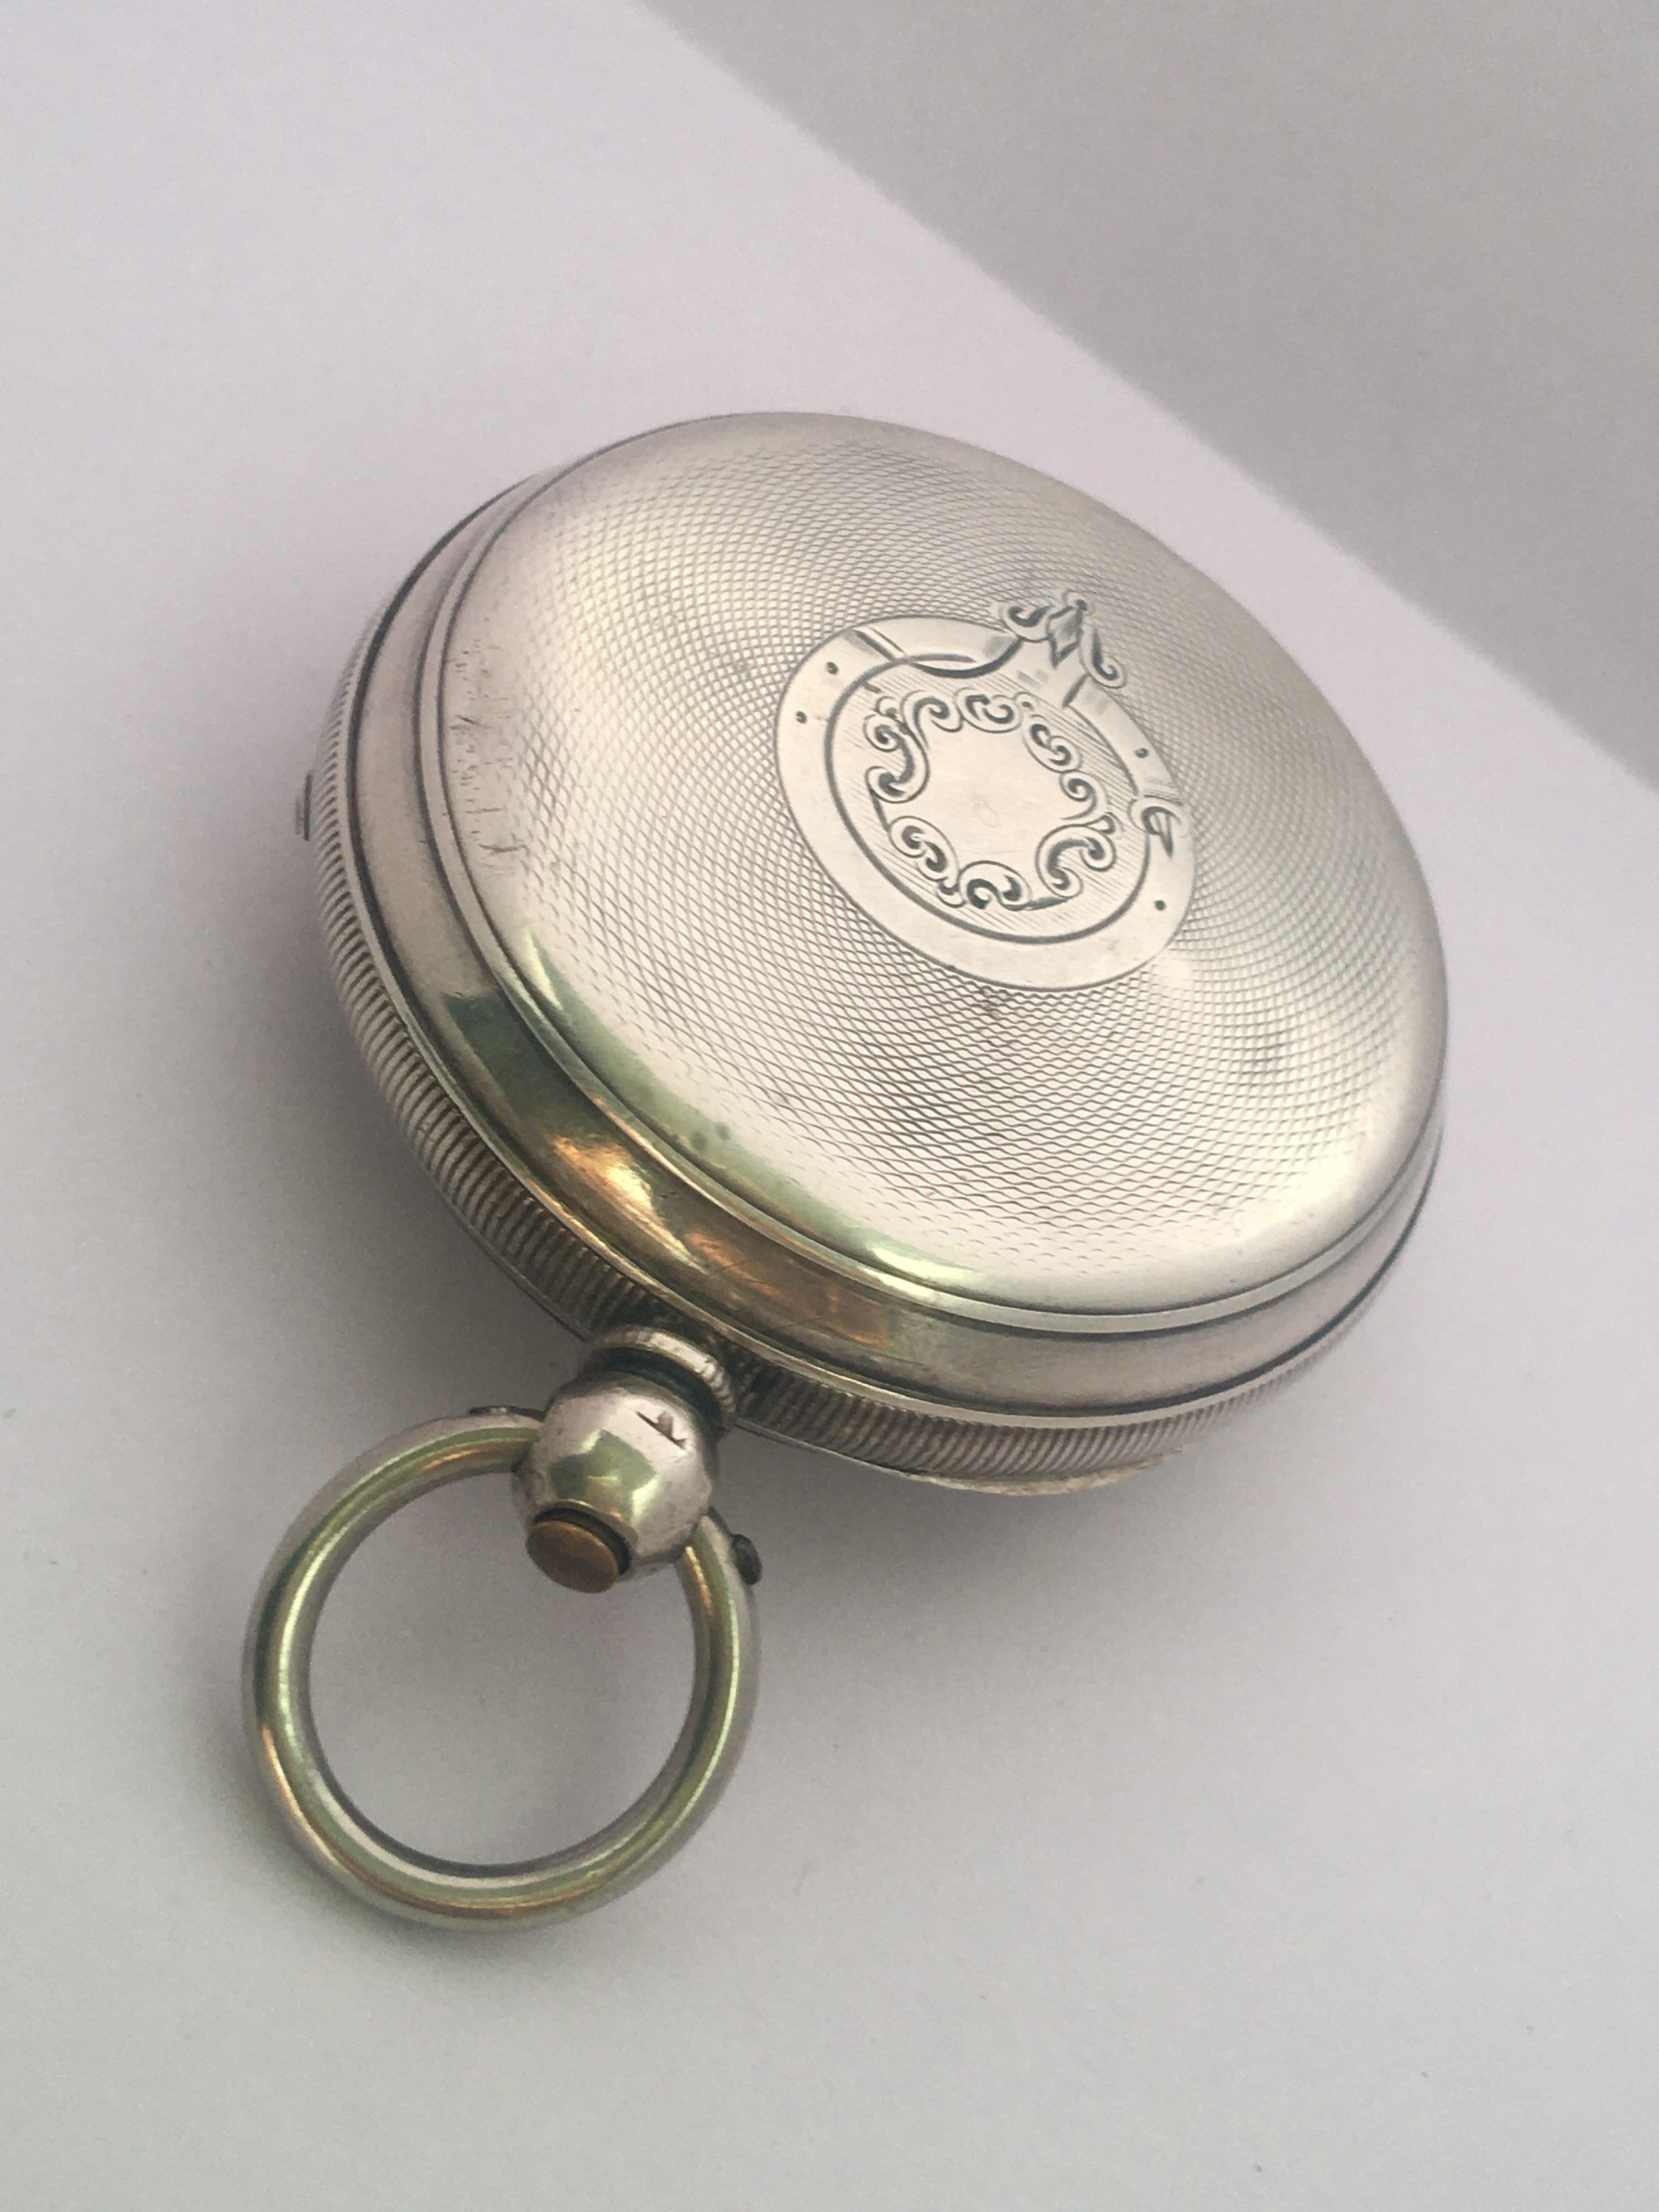 Antique Silver Key Winding Pocket Watch Signed H. E. Peck London For Sale 3